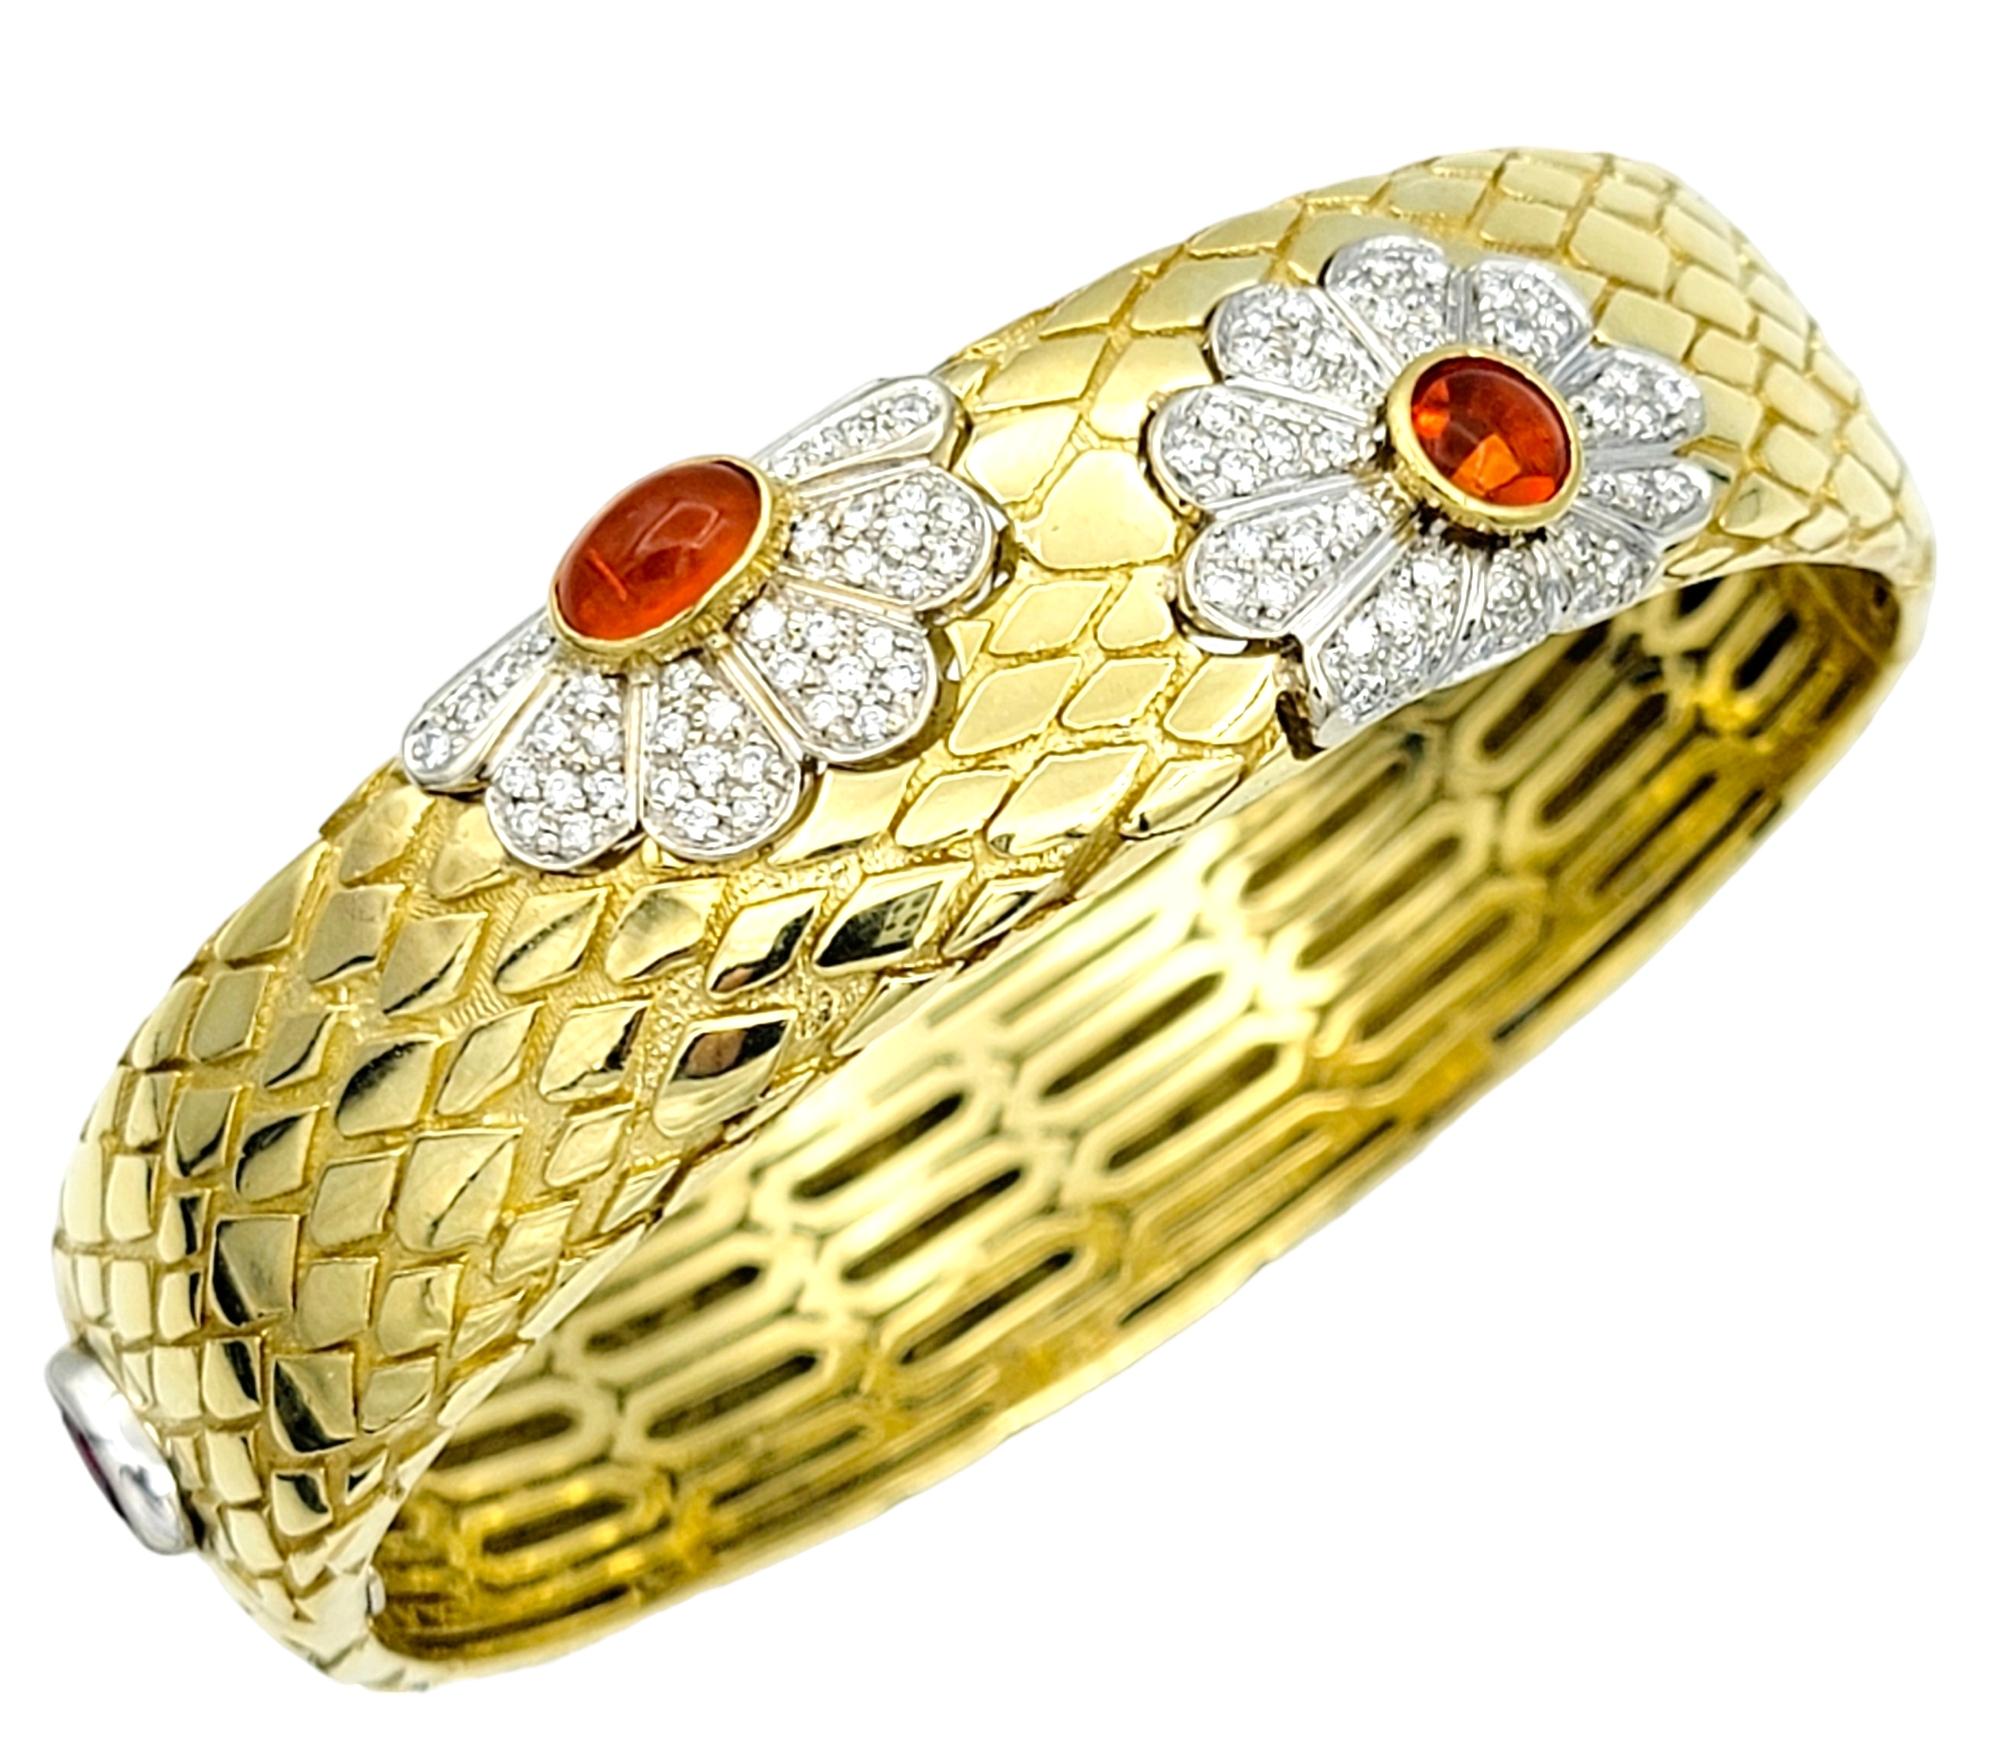 This gorgeous and unique piece from Roberto Coin is an absolute work of art that embodies luxury, sophistication, and timeless beauty. Bold in both design and style, this amazing designer bracelet is sure to turn heads. 

This incredible hinged